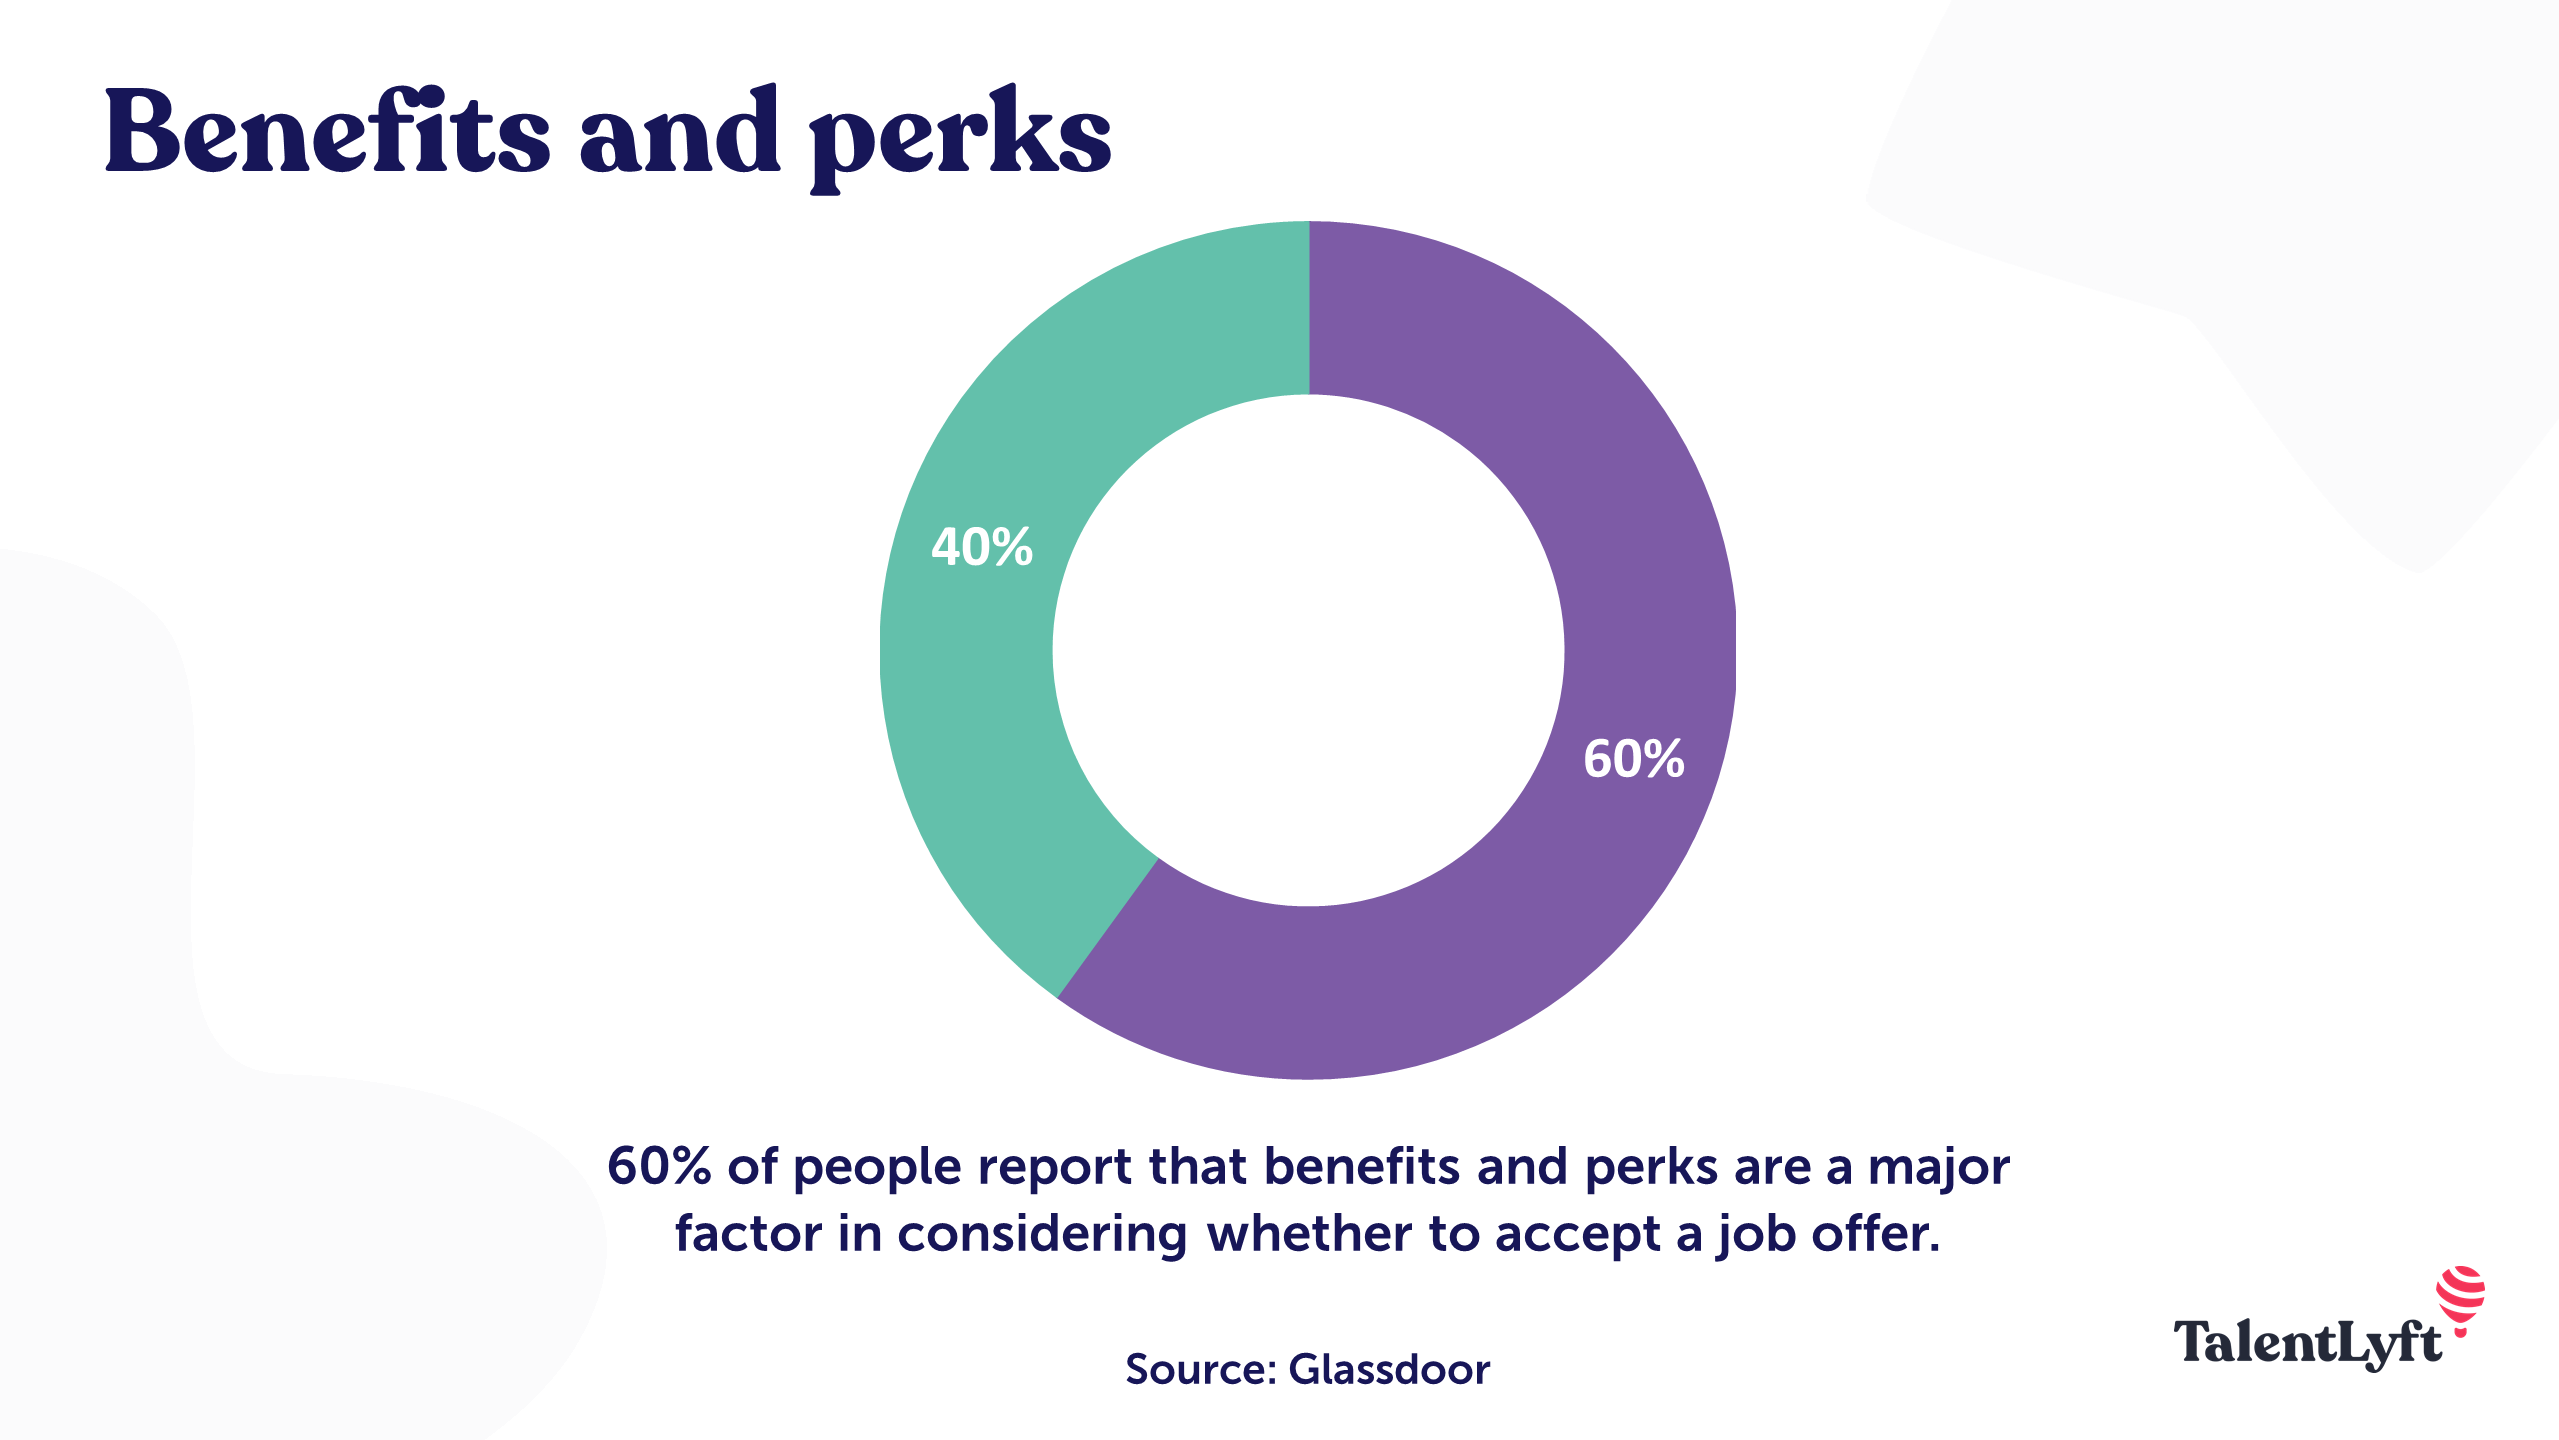 Employee value proposition: Perks and benefits